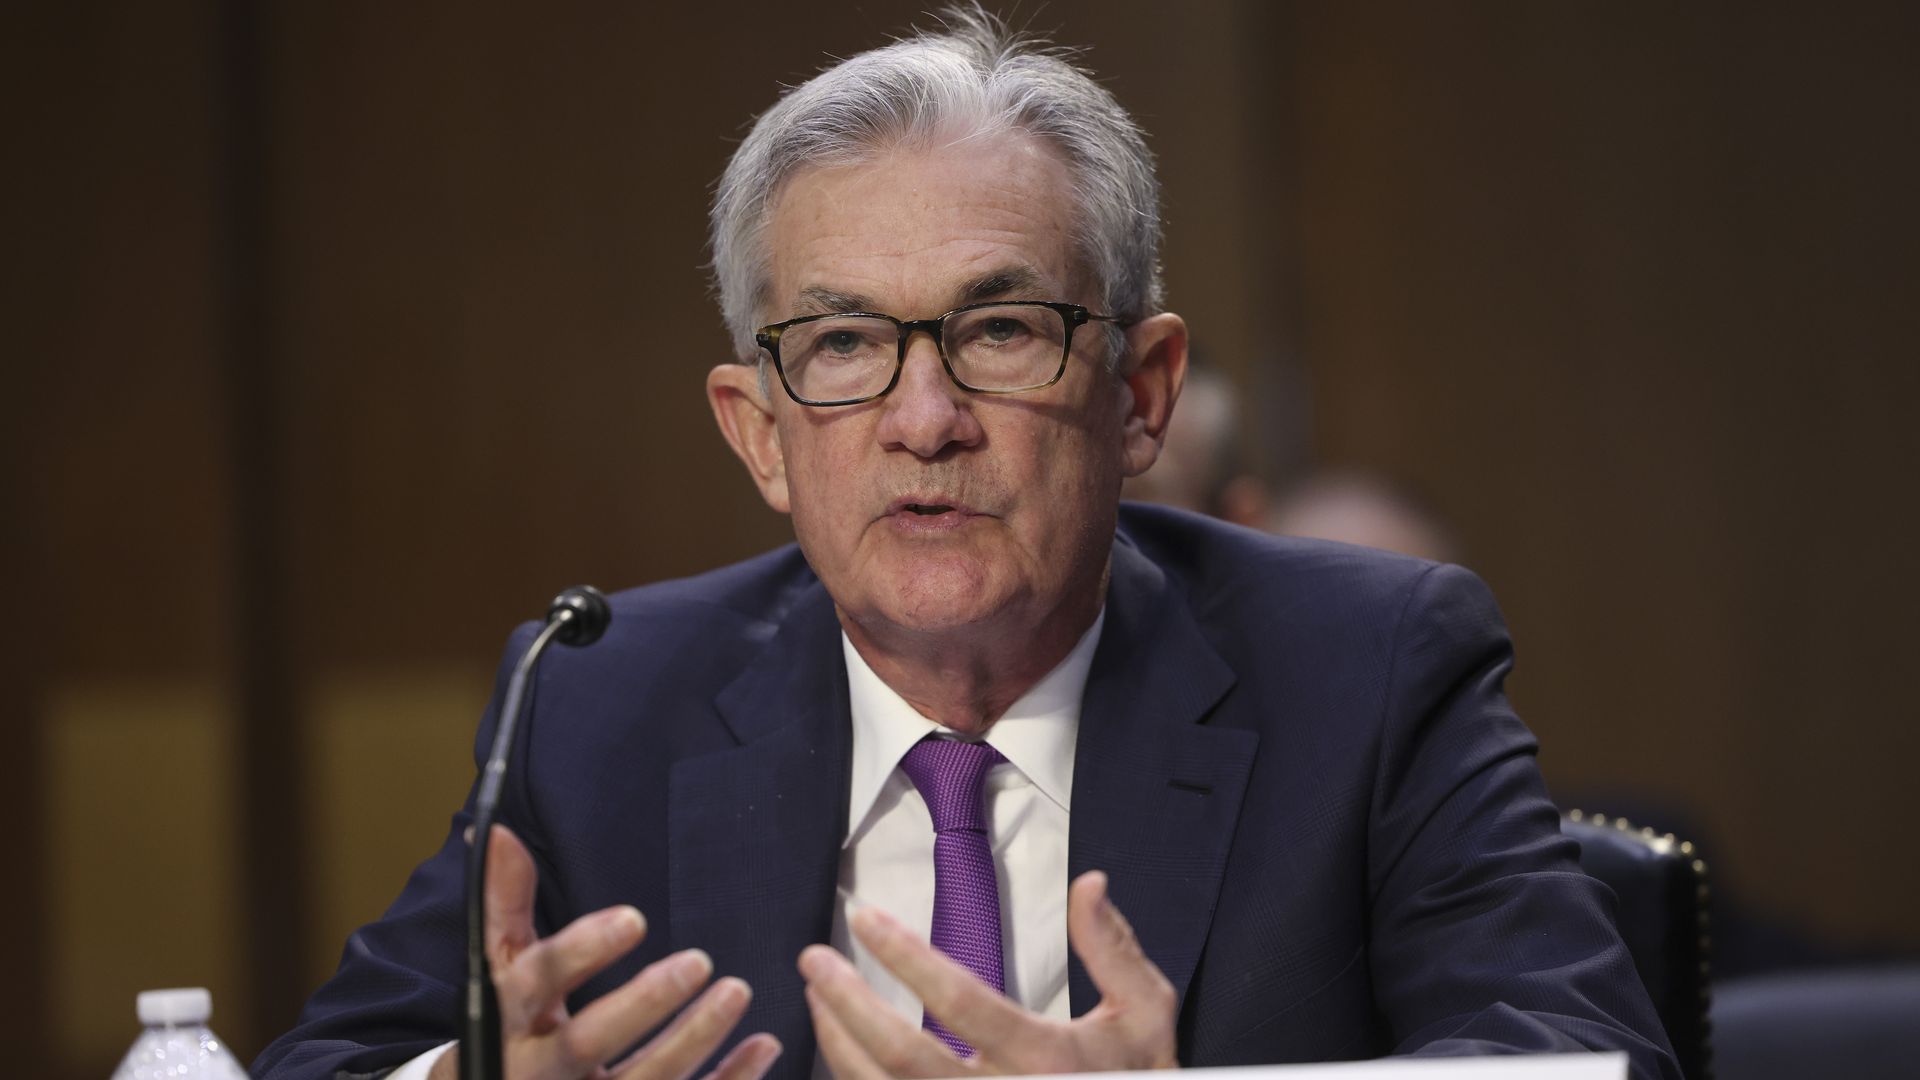 Federal Reserve Chair Jerome Powell is seen testifying to Congress.